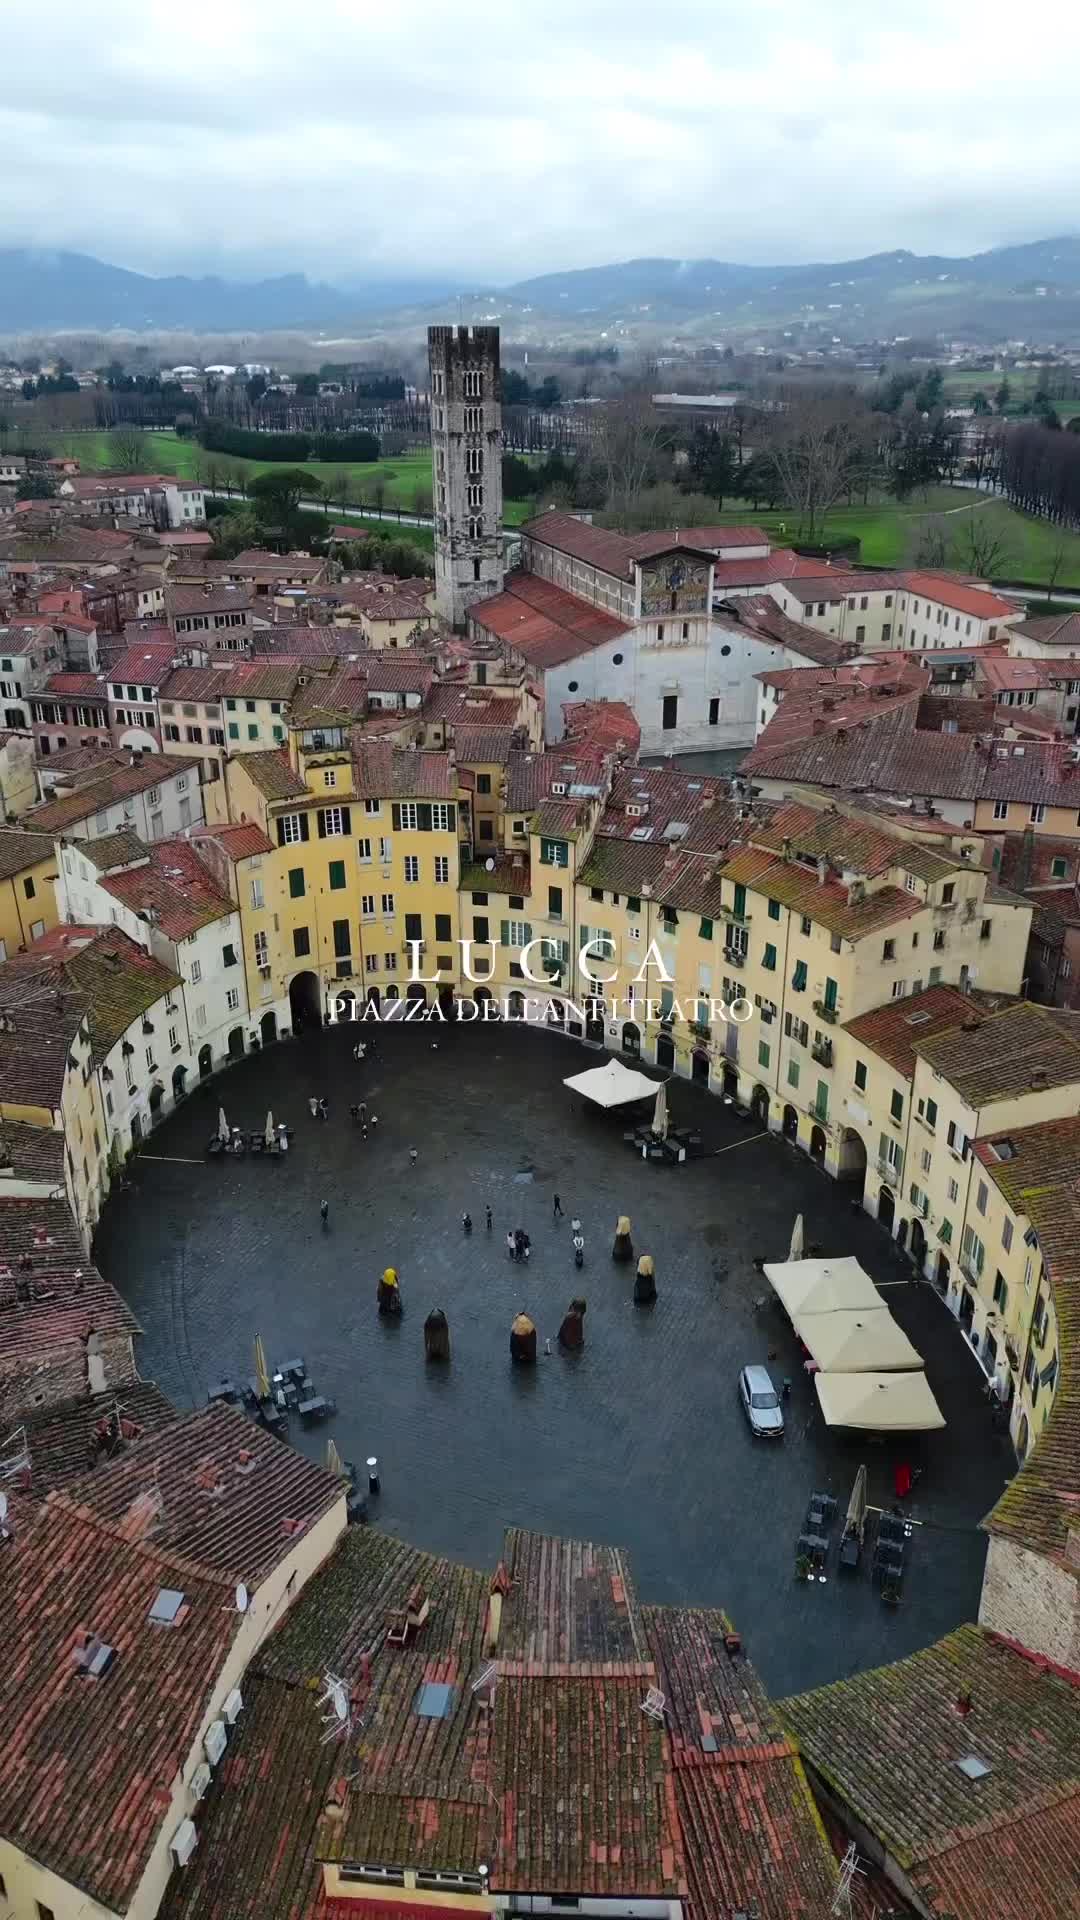 Discover Piazza dell’Anfiteatro in Lucca, Italy